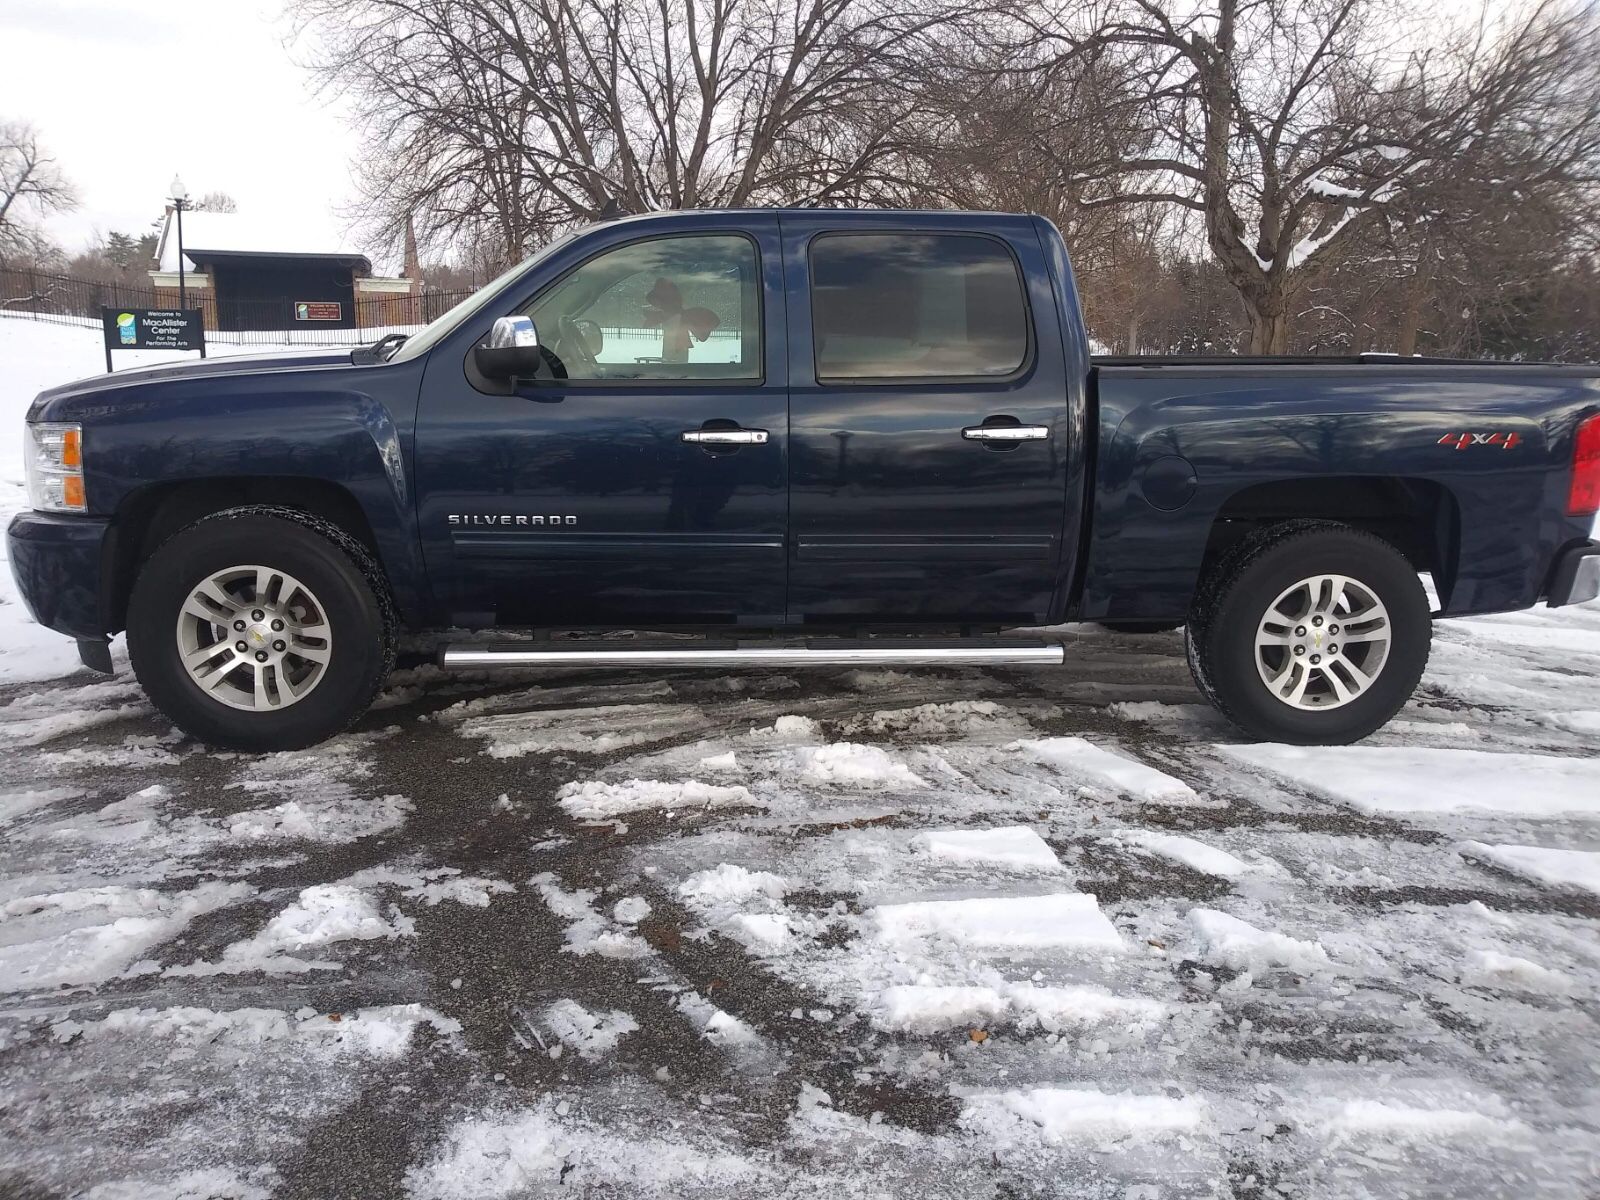 2011 Chevy Silverado four-door 4 x 4 good tires good breaks all around solid reliable truck price to sell 11 for 50 Cash talks in hand come see it an